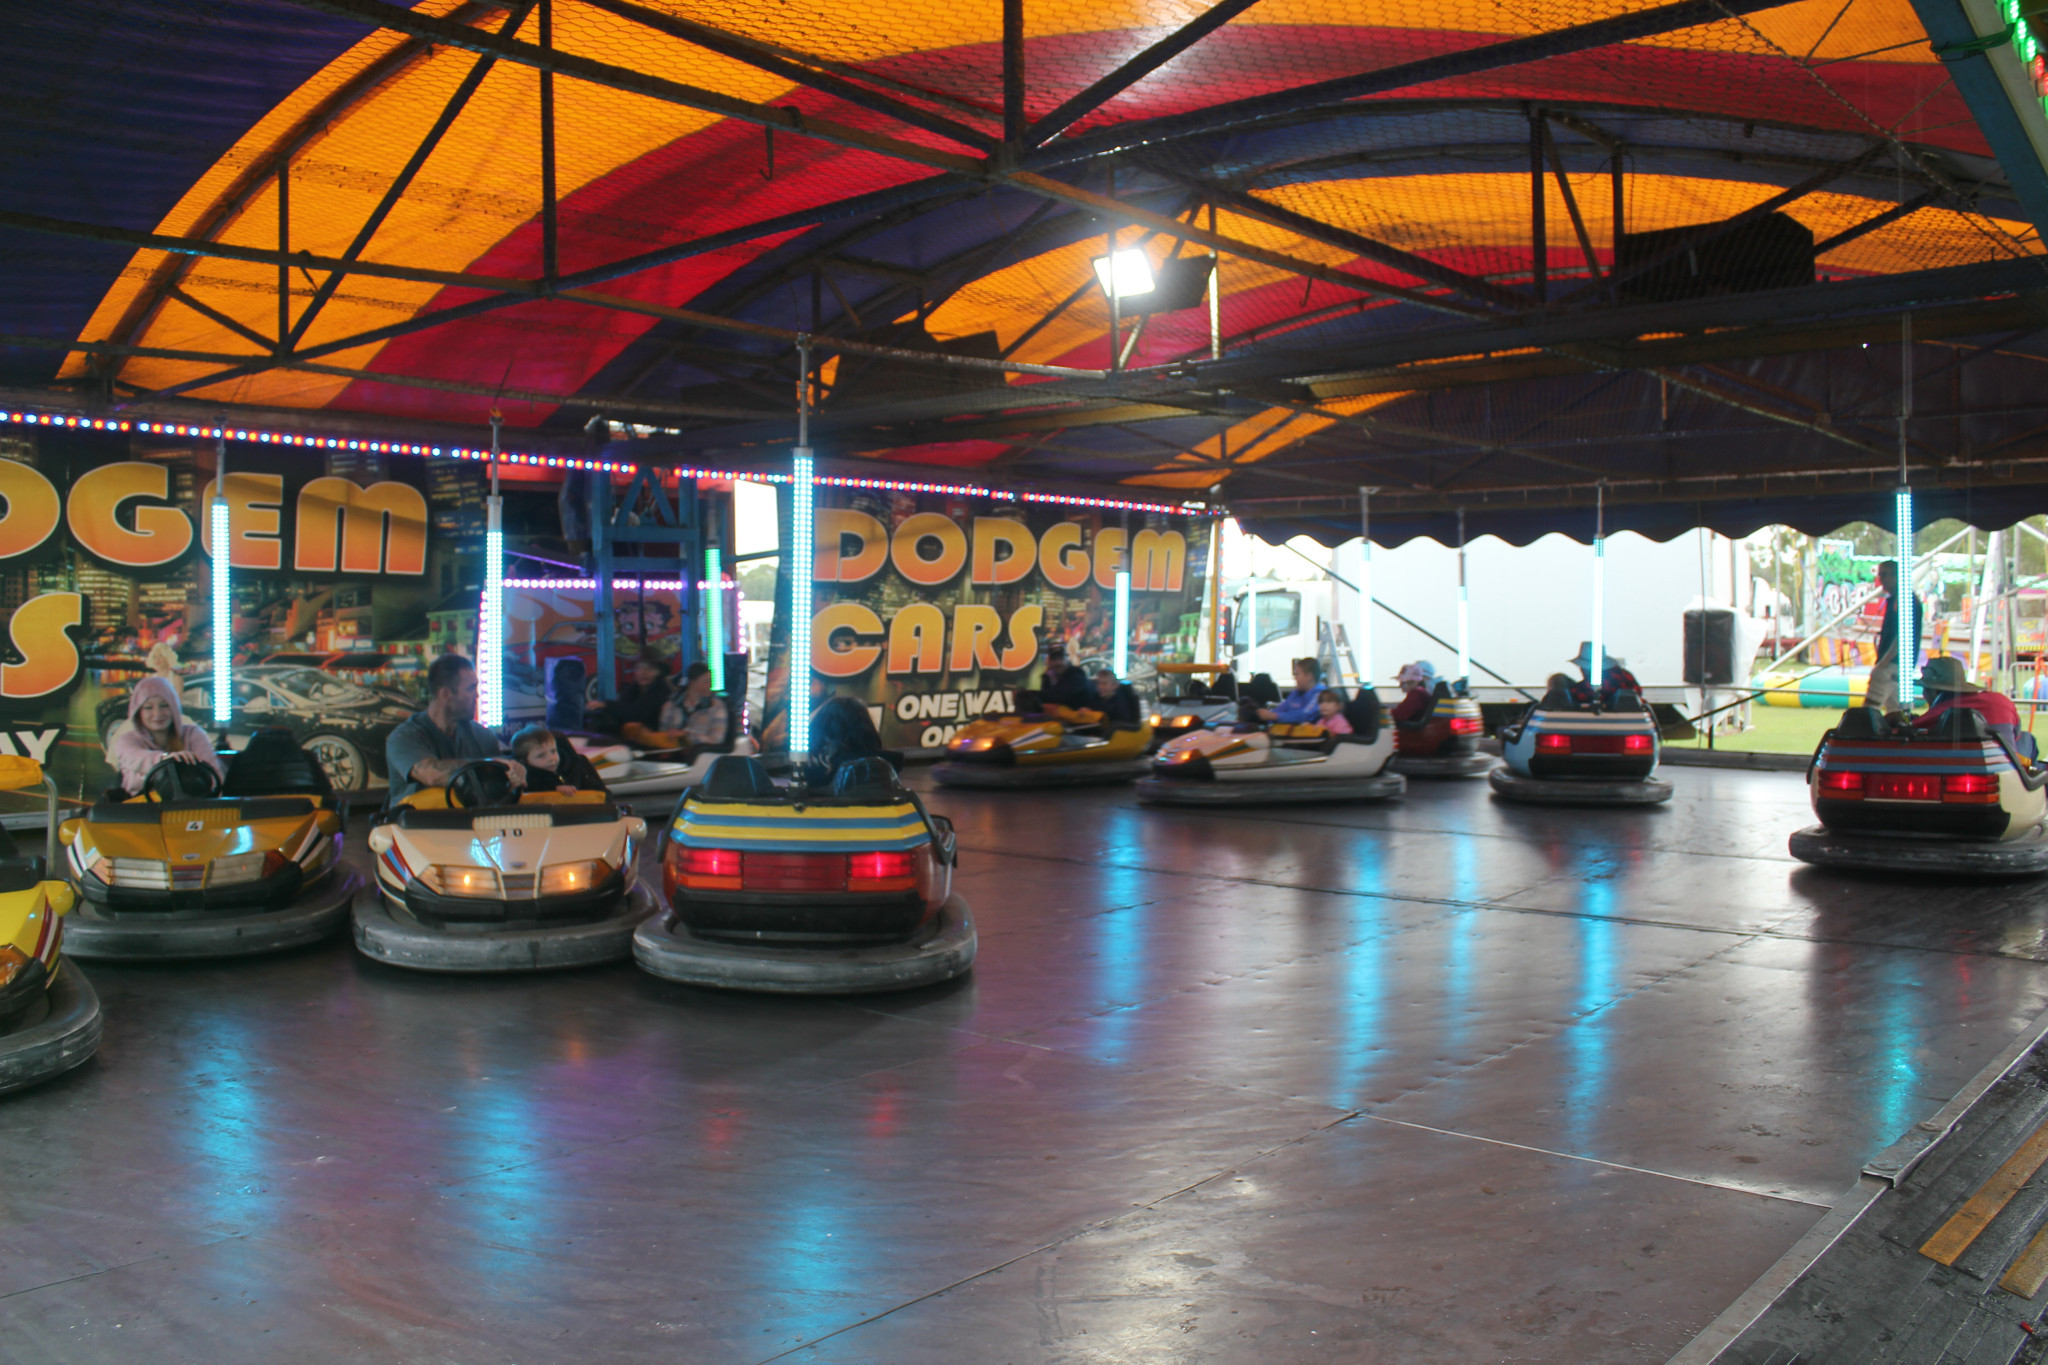 Many came to enjoy the range of attractions and pavilions in spite of the morning rain. The dodgem cars attracted a steady stream of eager showgoers. Photos by Barbara Scott and The Gilgandra Weekly: Nicholas Croker.